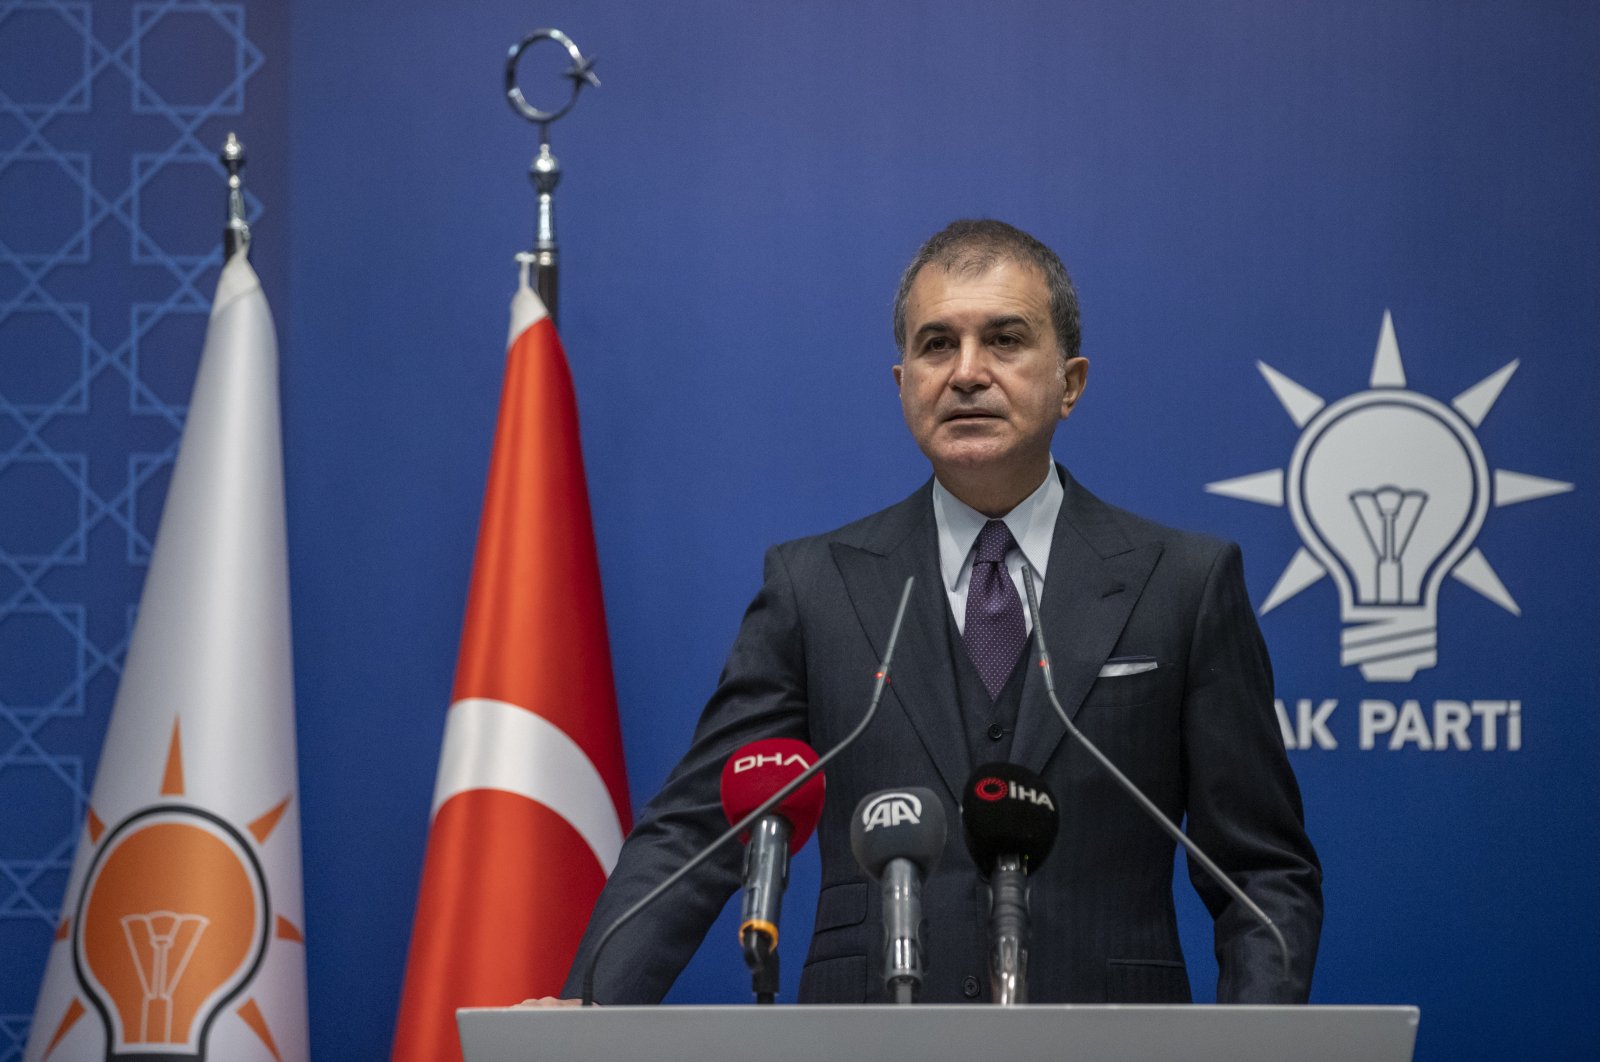 Turkey's ruling Justice and Development Party (AK Party) Spokesperson Ömer Çelik speaks to reporters in a news conference, Dec. 14, 2020 (AA File Photo)